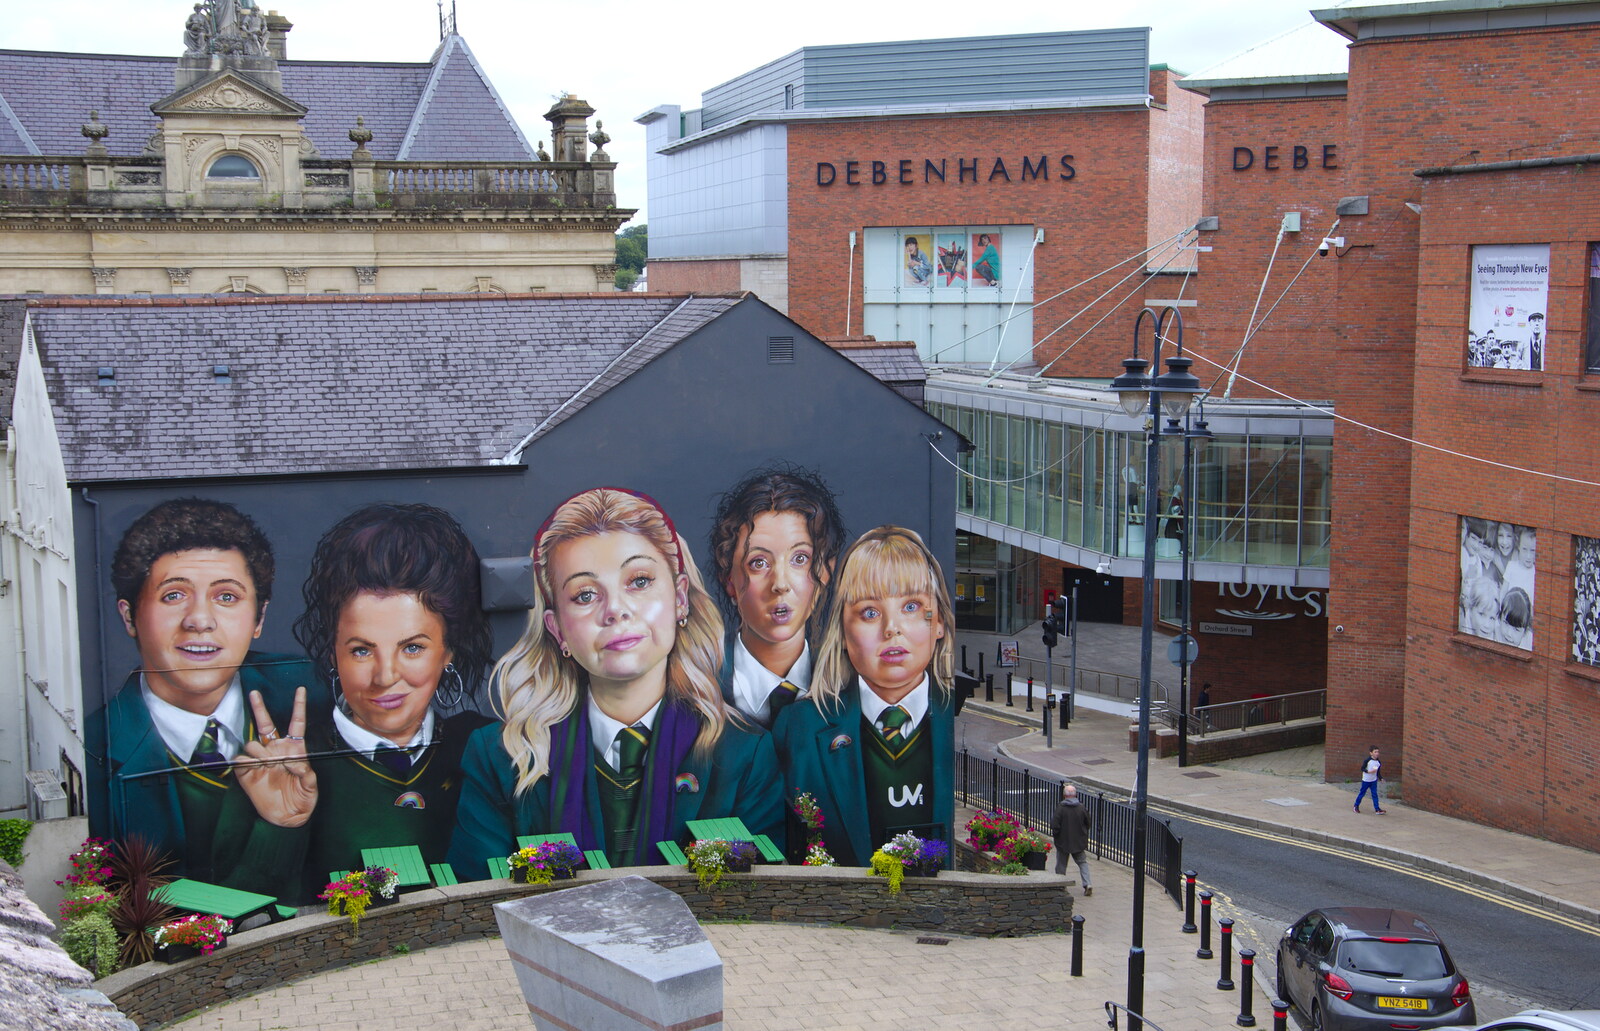 The Derry Girls and Debenhams in the background from A Day in Derry, County Londonderry, Northern Ireland - 15th August 2019